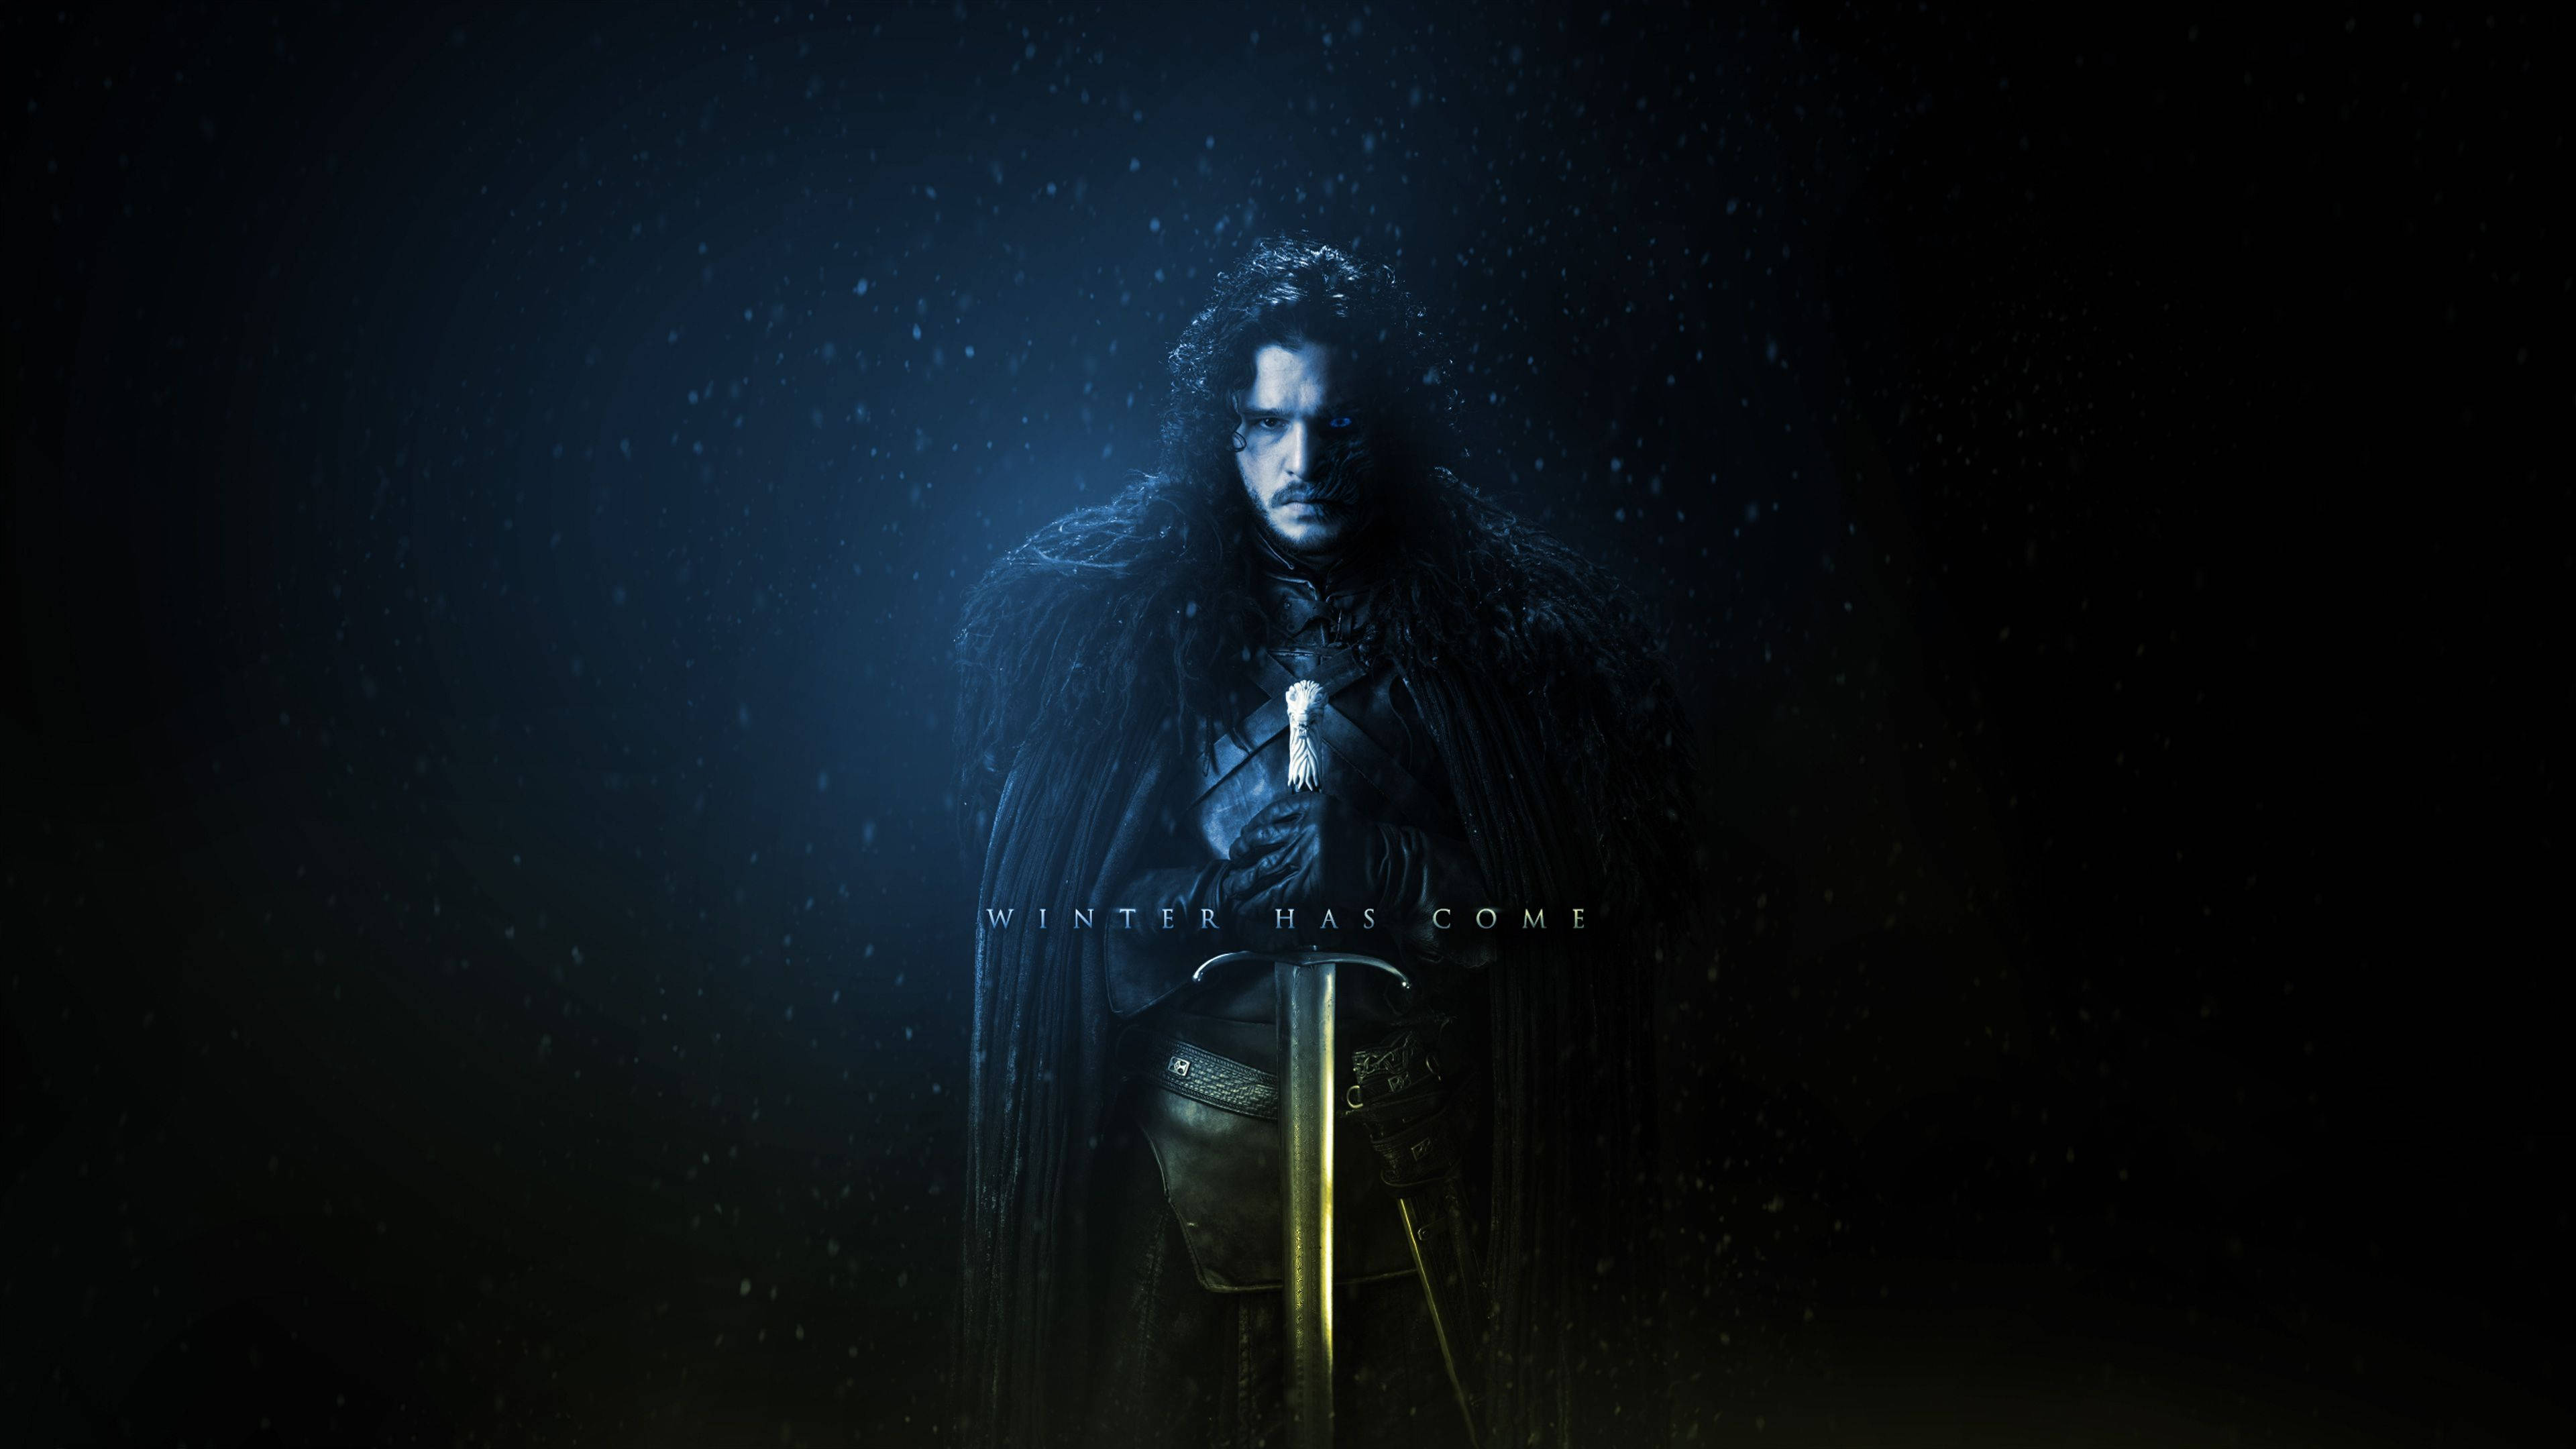 Dual Monitor Game Of Thrones Wallpapers